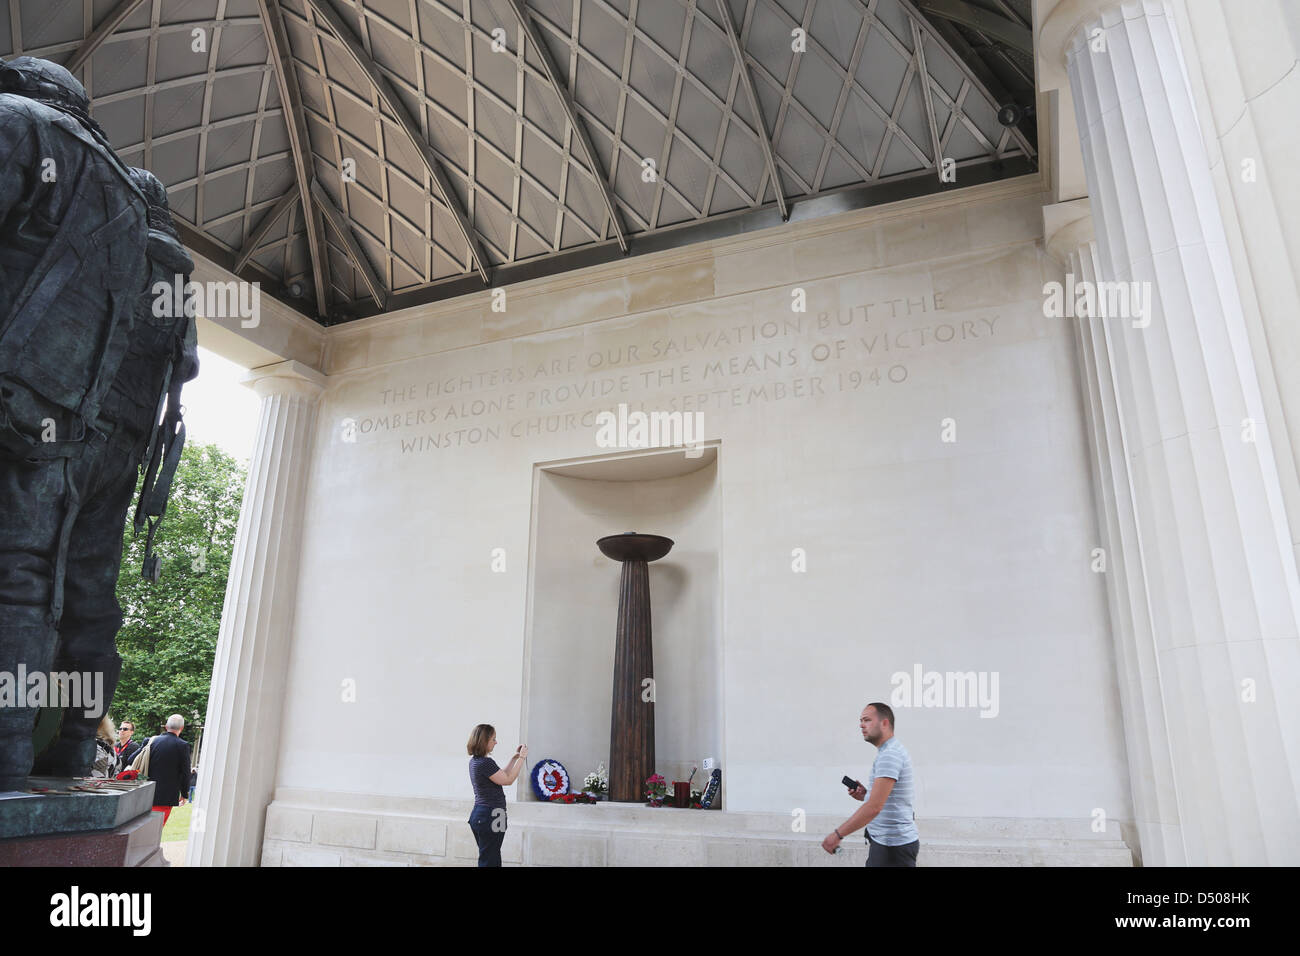 RAF Bomber Command Memorial at Green Park in London, England Stock Photo